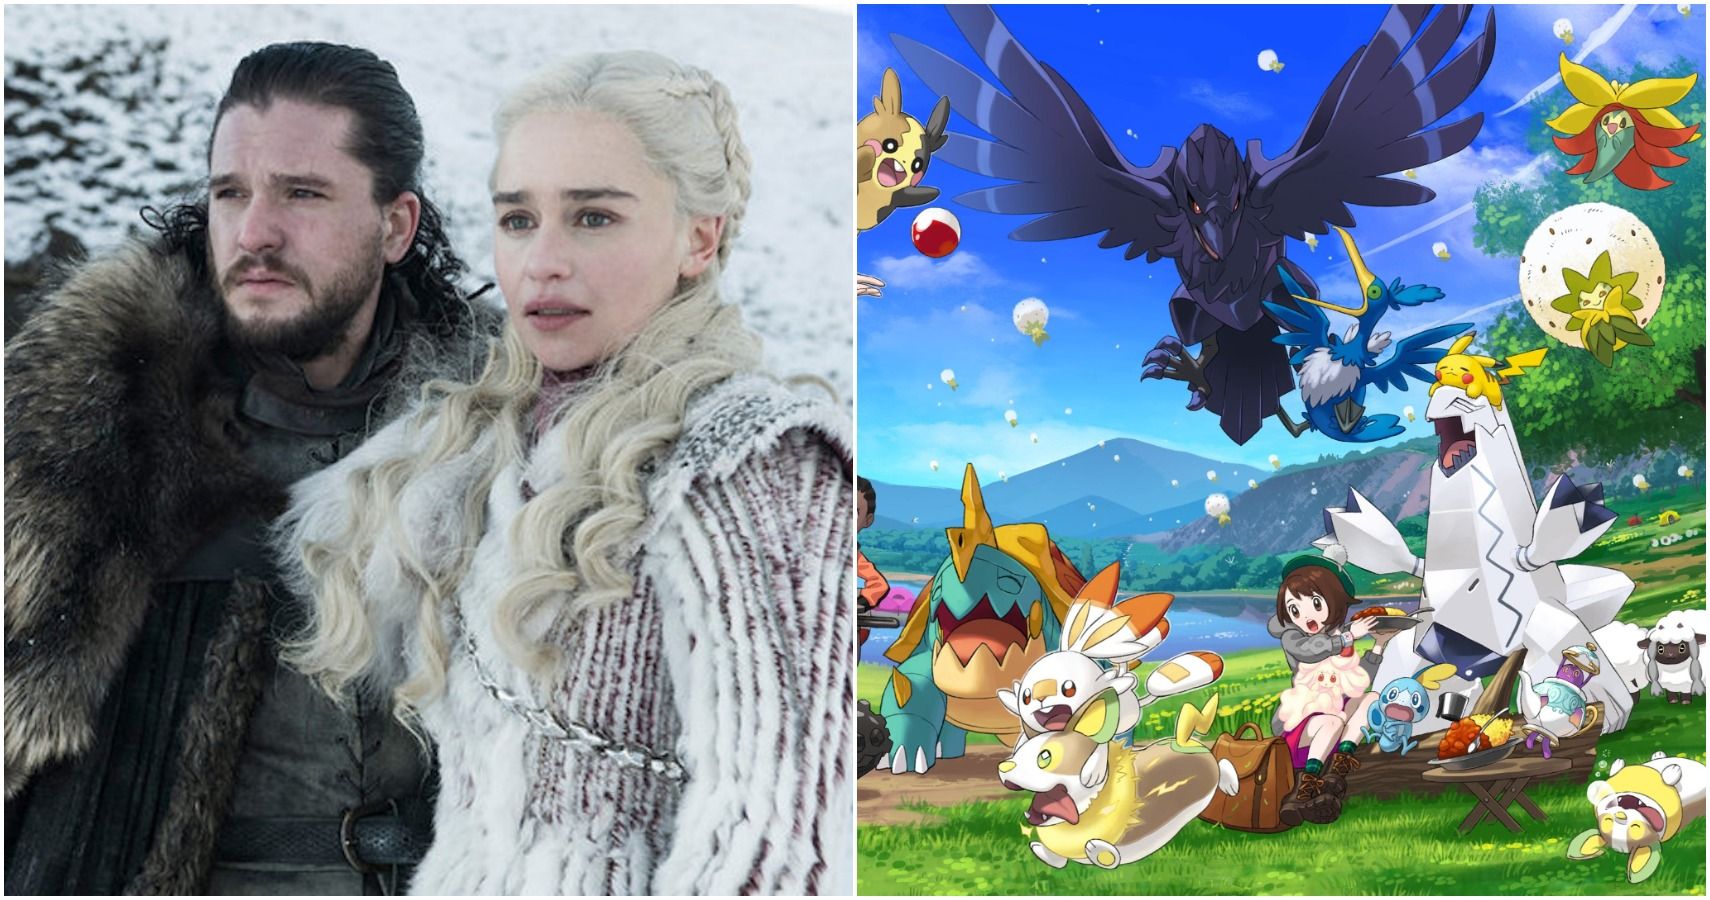 Matching Game Of Thrones Characters With Their Partner Pokémons